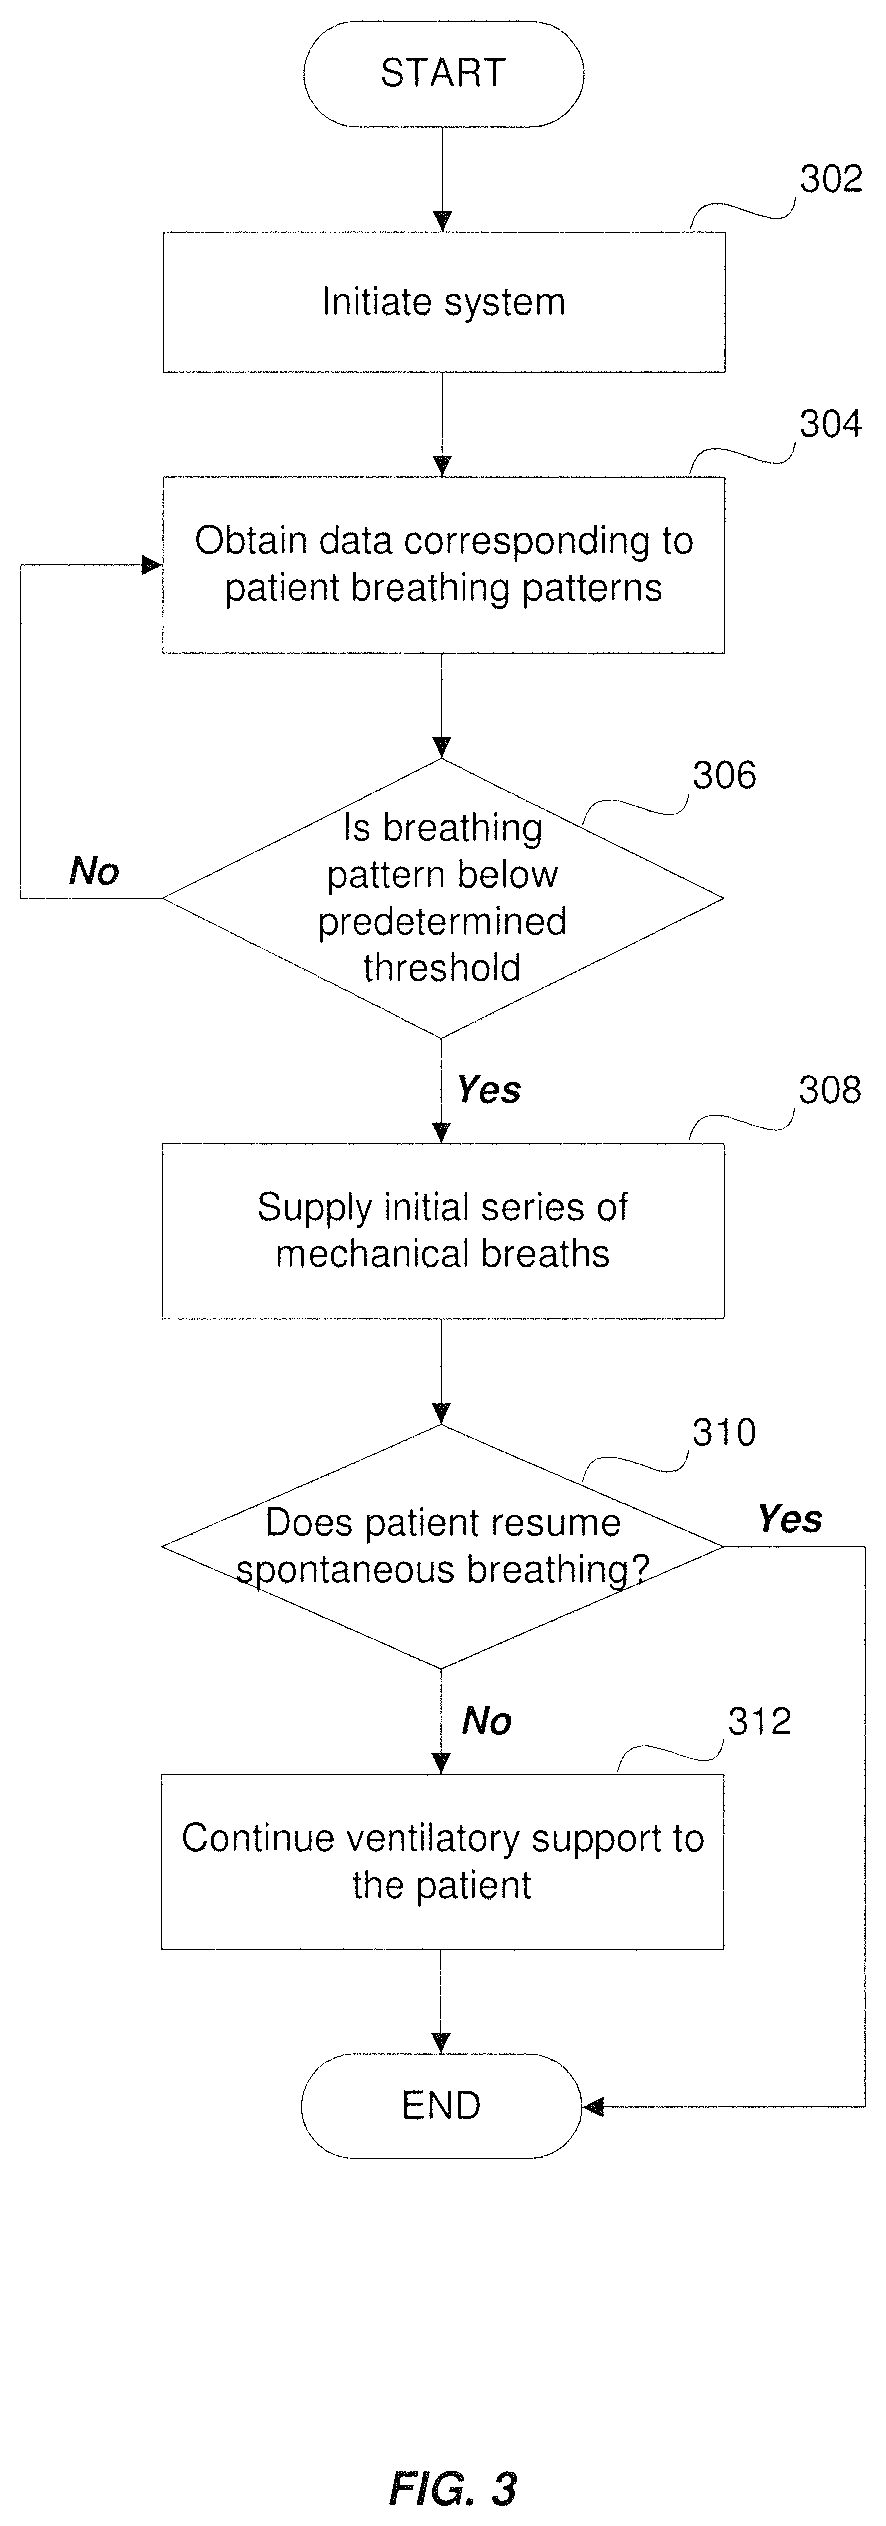 Method and system for diagnosis and treatment of sleep disordered breathing of a patient